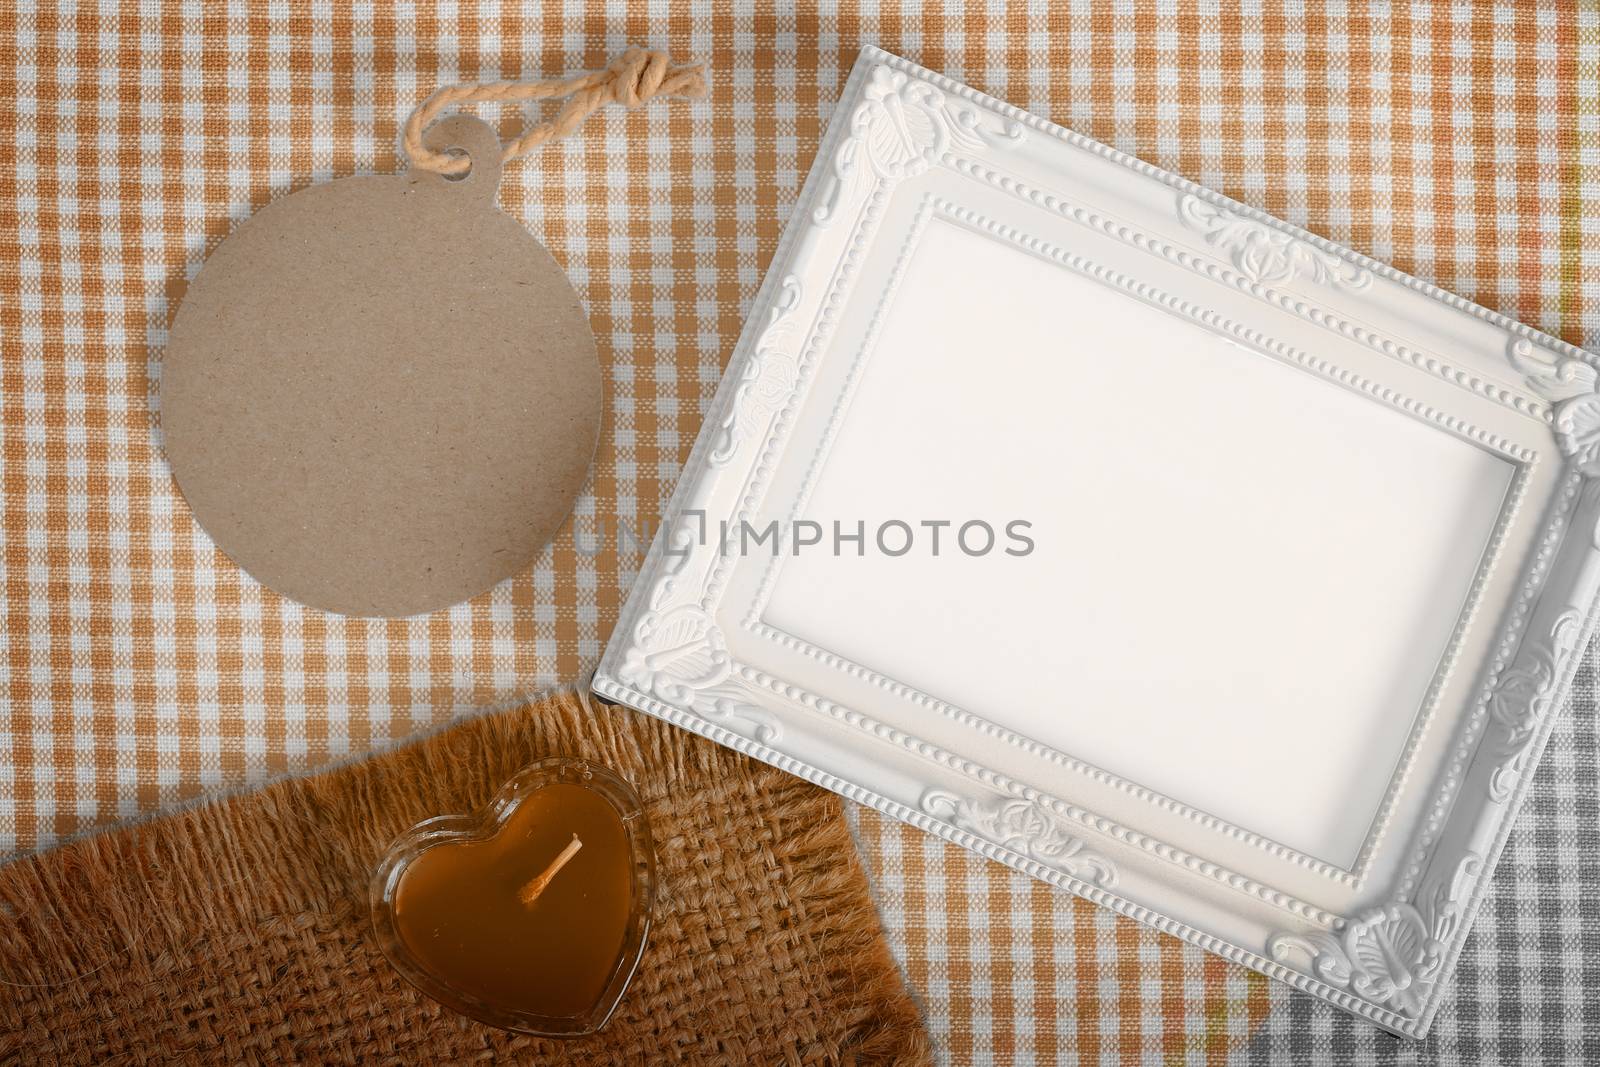 Top view of empty white photo frame and paper tag next heart sign from candle in glass over the fabric, clipping path ready to put photographs.